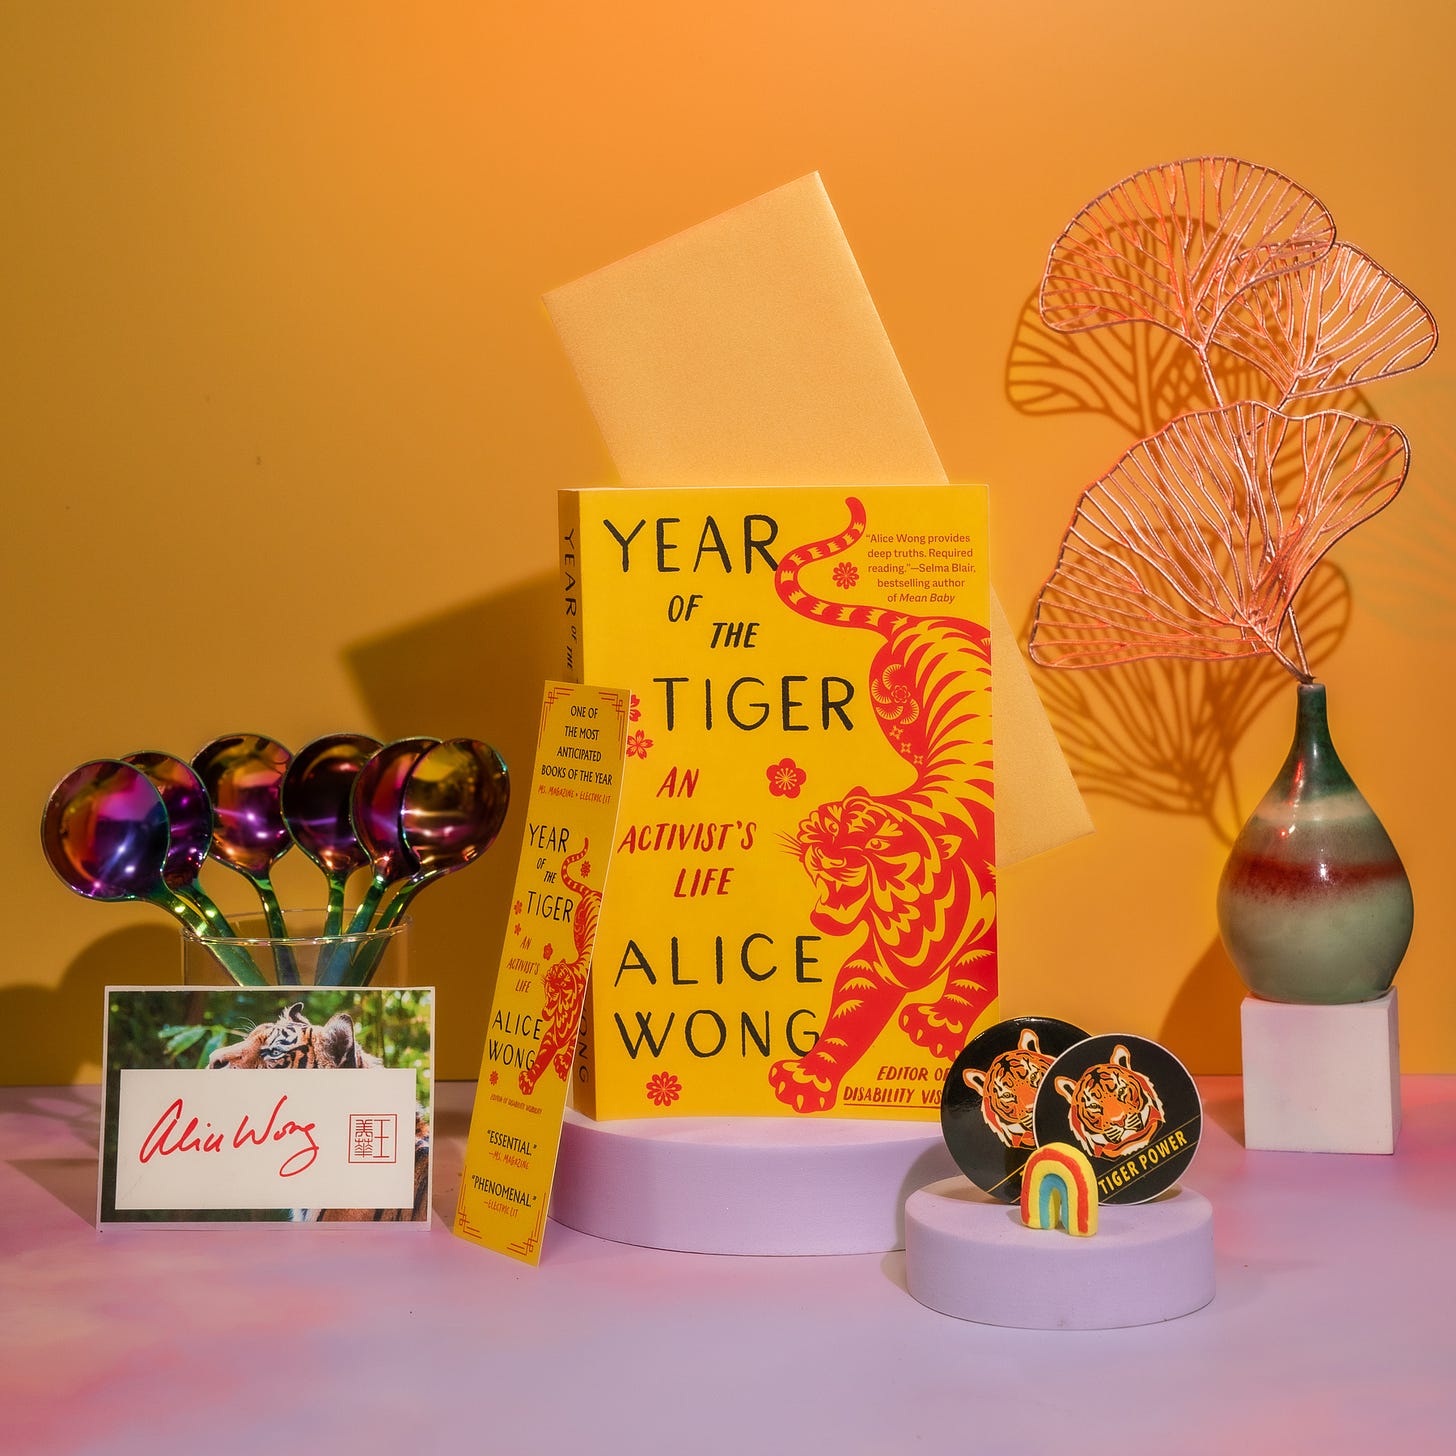 Photo with a tangerine background with a pink border at the bottom with a copy of Year of the Tiger paperback in the center. The left in a glass cup is a bunch of rainbow dipper spoons from @umeshiso_ with a signed tiger bookplate by Alice Wong in front of the cup. A tiger bookmark positioned to the left of the book. On the right is a multicolored pear-shaped vase holding gold ginkgo leaf decorations. In the front is one round tiger sticker and one round tiger button with a small rainbow decor standing upright. Photo credit: @ziru.mo (on IG)